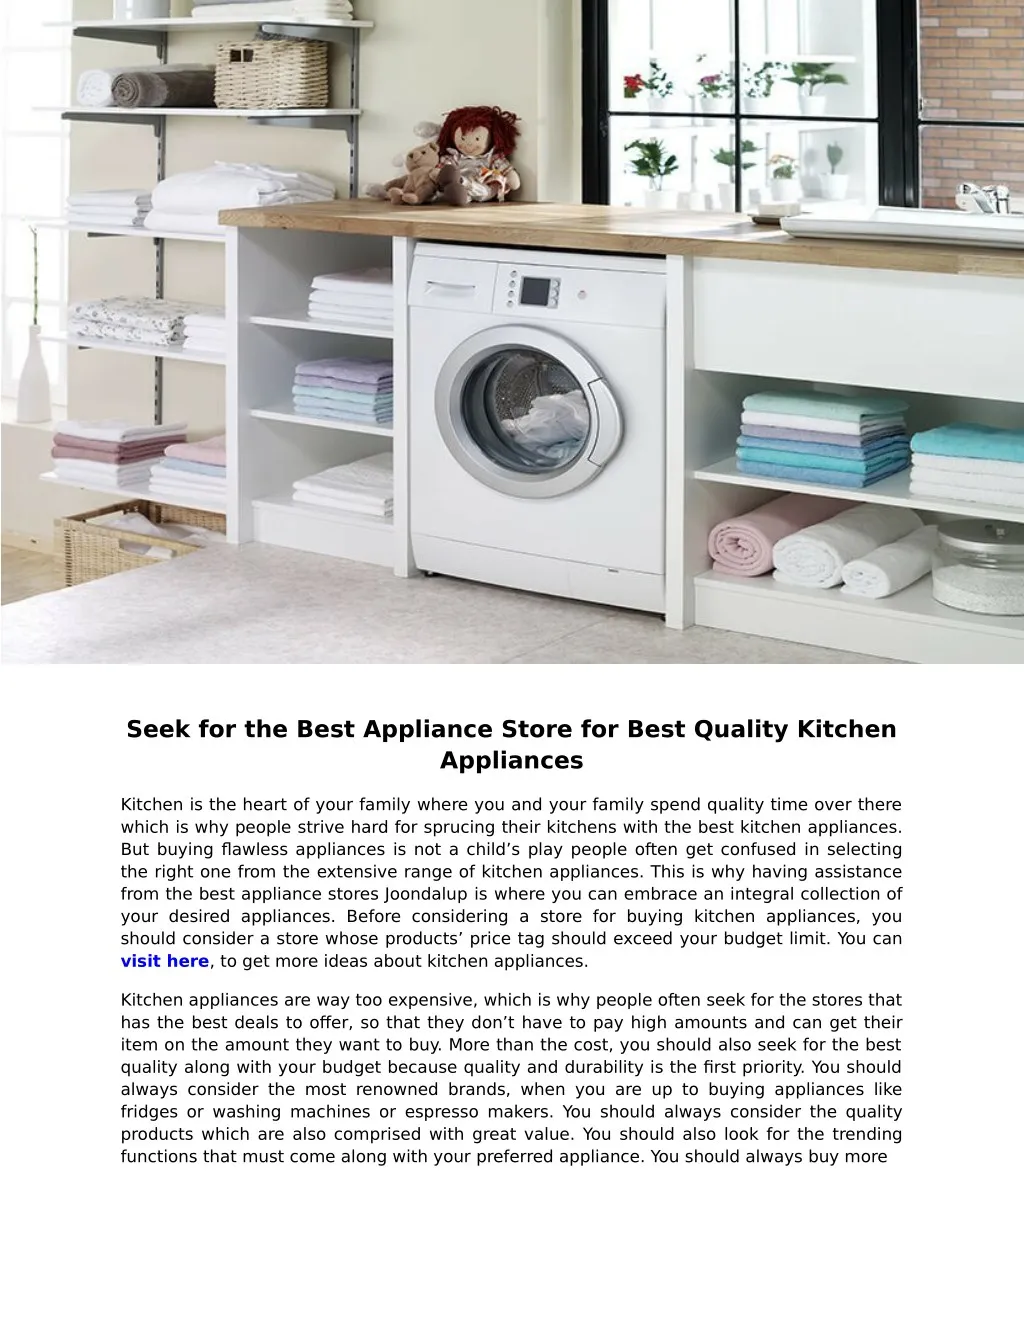 seek for the best appliance store for best